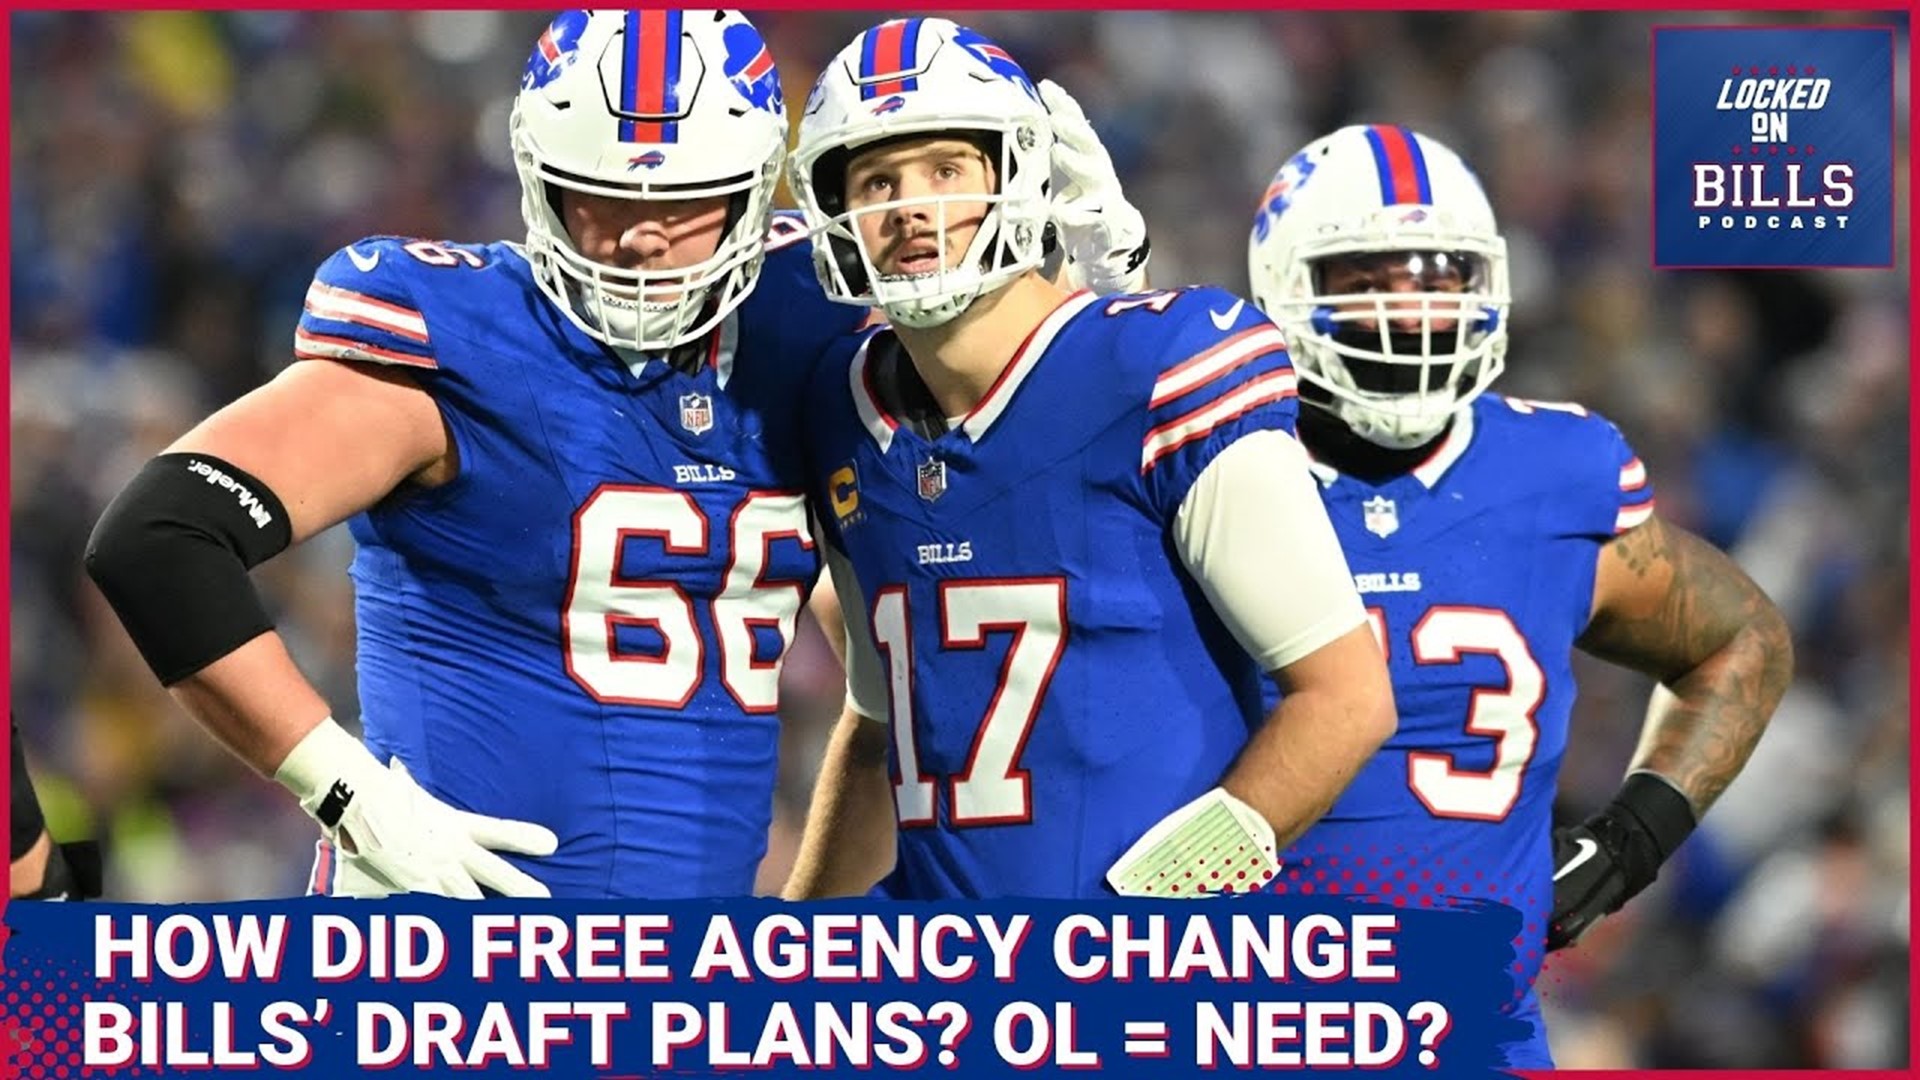 How did free agency impact Buffalo Bills’ NFL Draft plan? Offensive line a sneaky need? Comp picks?